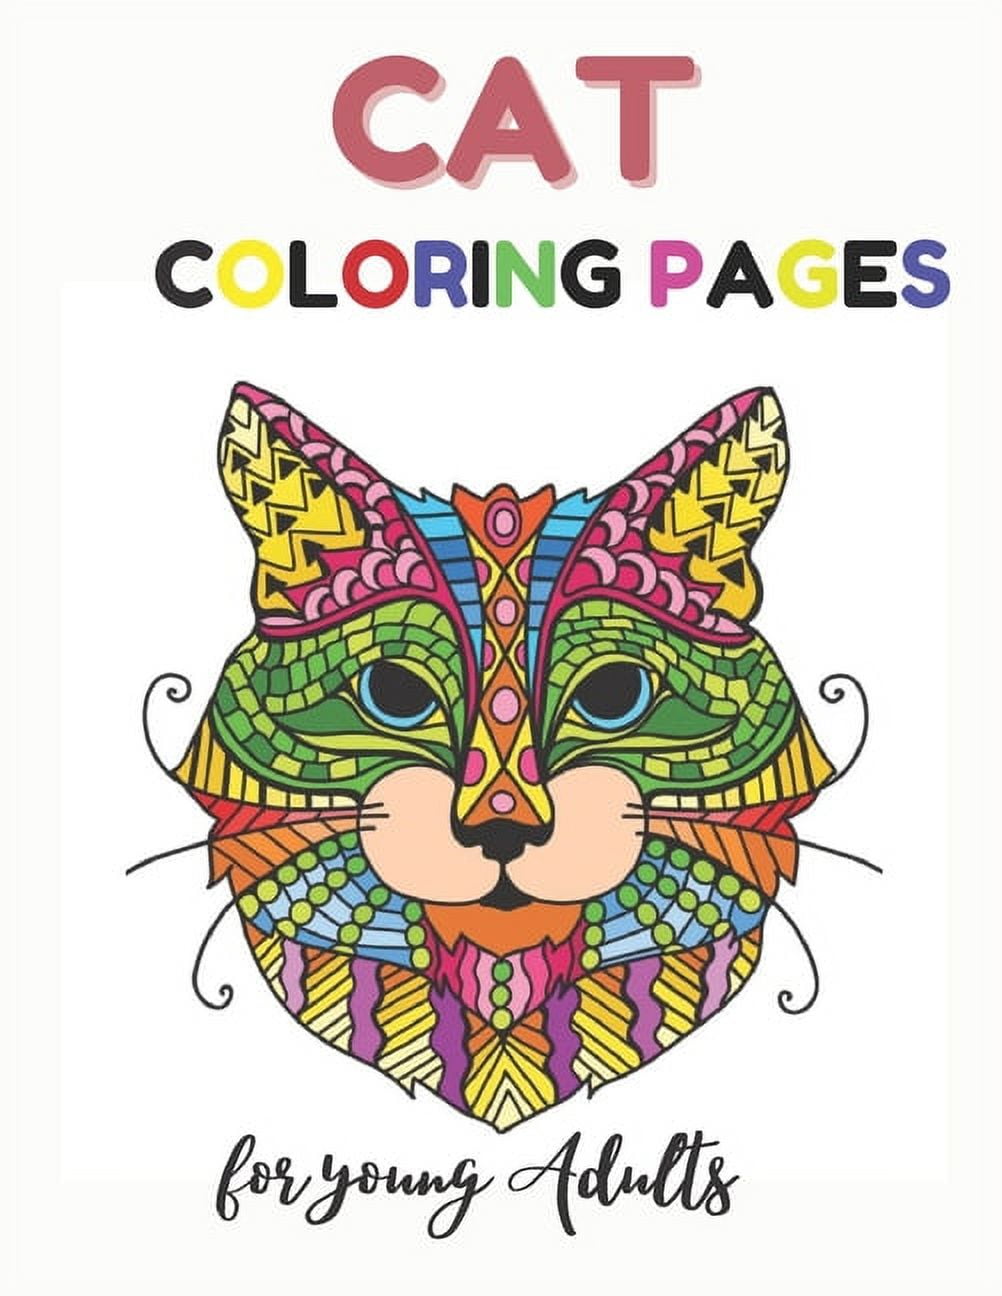 Cat Coloring Book For Adults: 40+ Amazing Cats illustrations For Adults,  Cats Coloring Books For Adults Stress Relief and Relaxation (Paperback)